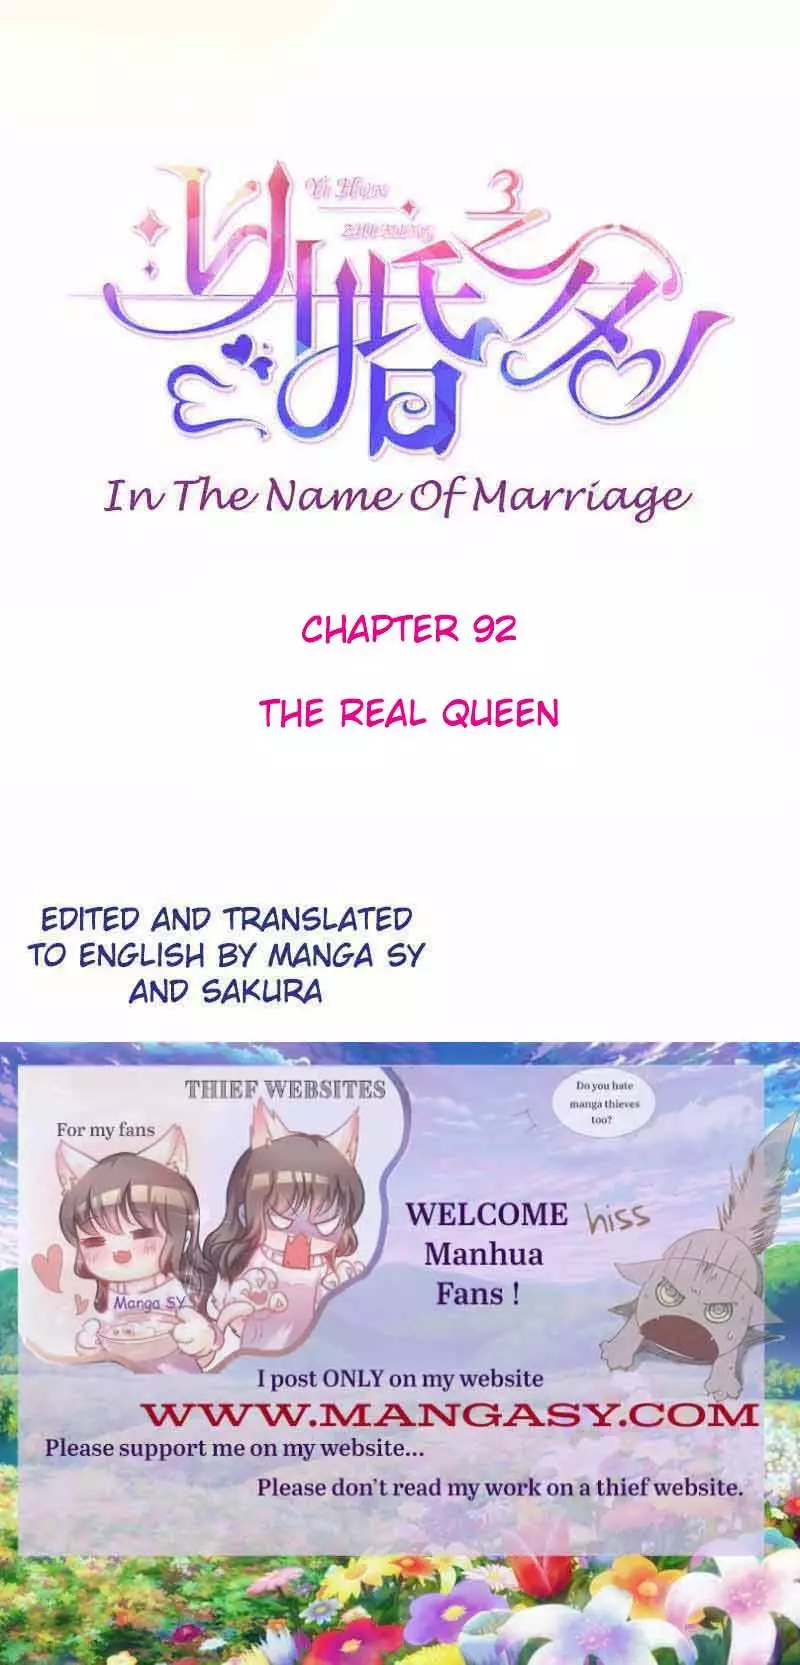 In The Name Of Marriage - 92 page 1-cb41d9f9